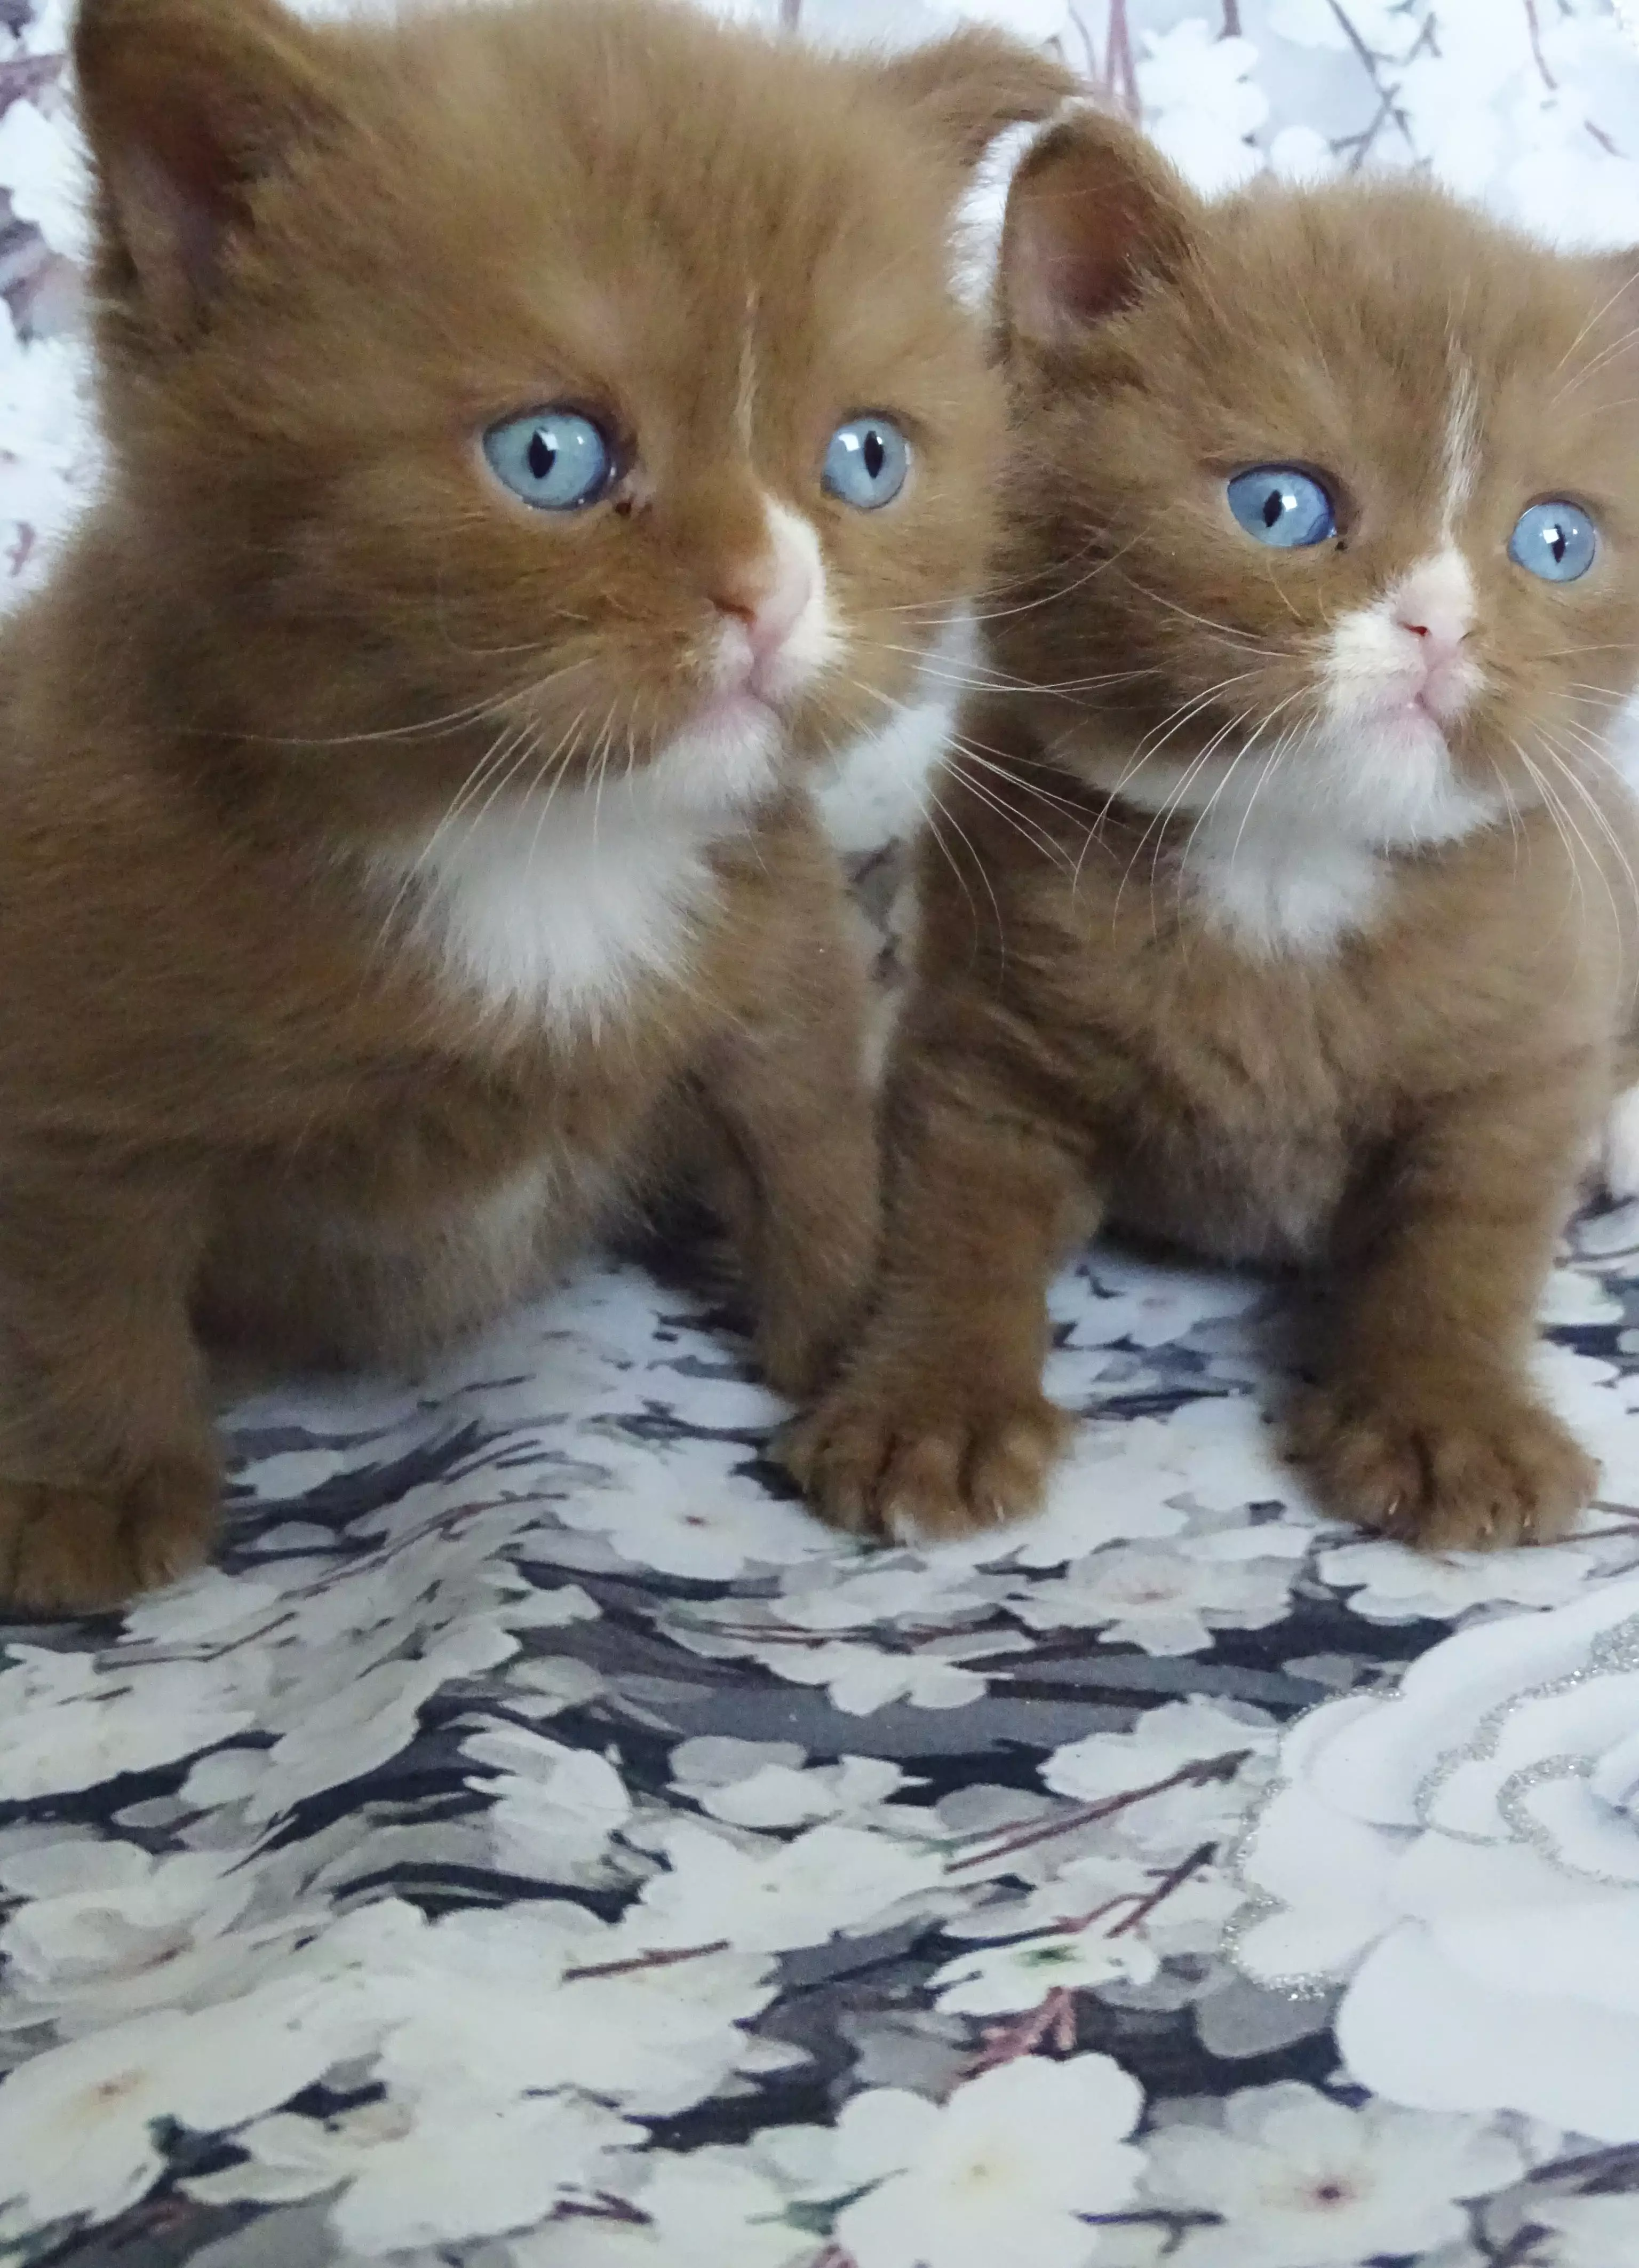 These ginger kitties have blue eyes just like their dad (